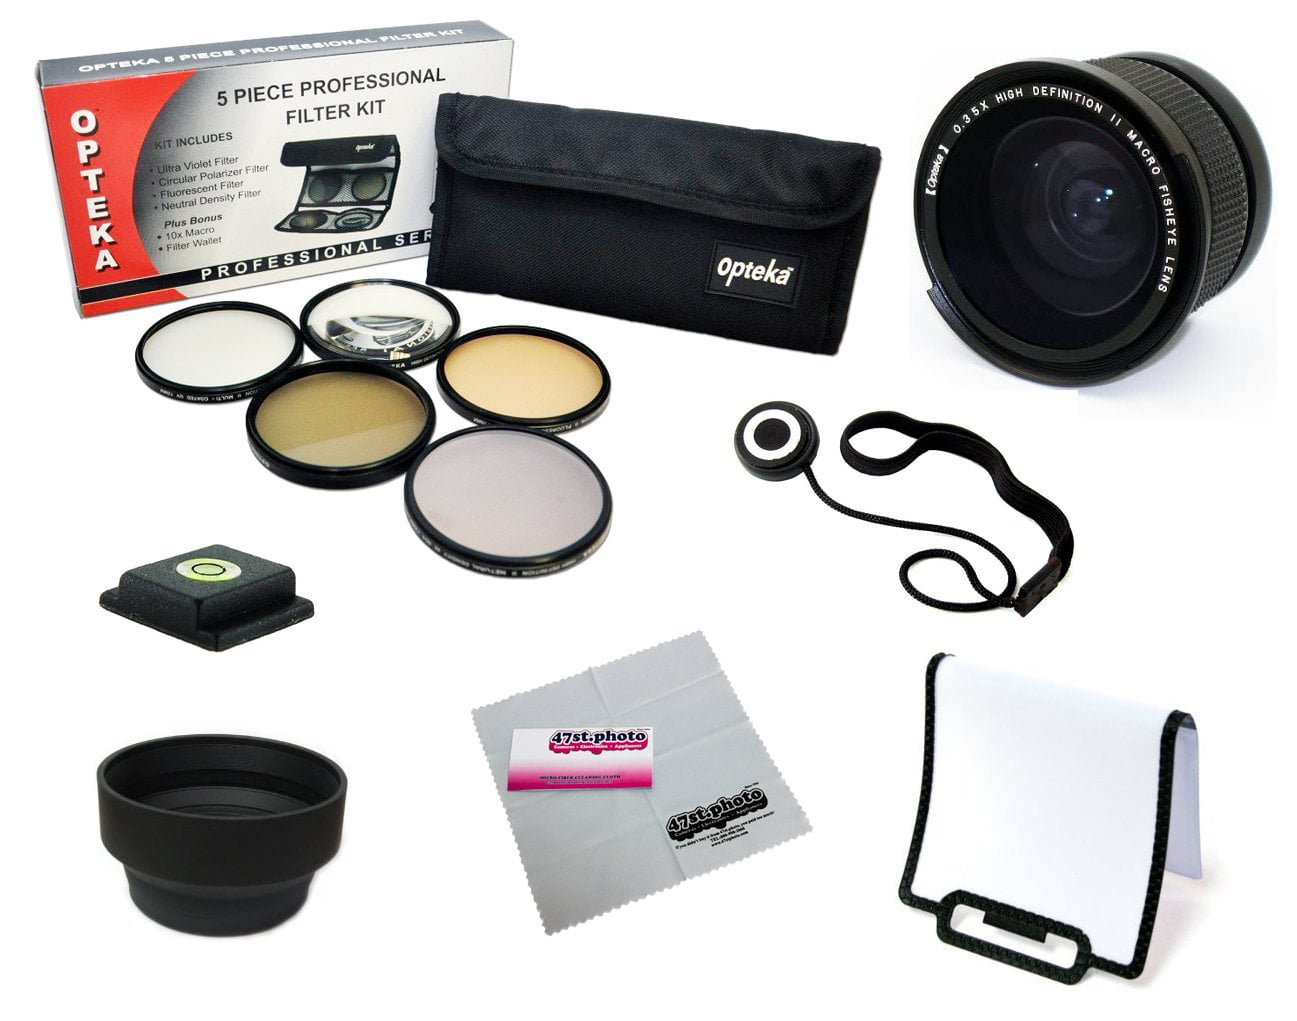 Skylight & UV Filters Filters & Accessories Microfiber Cleaning ...